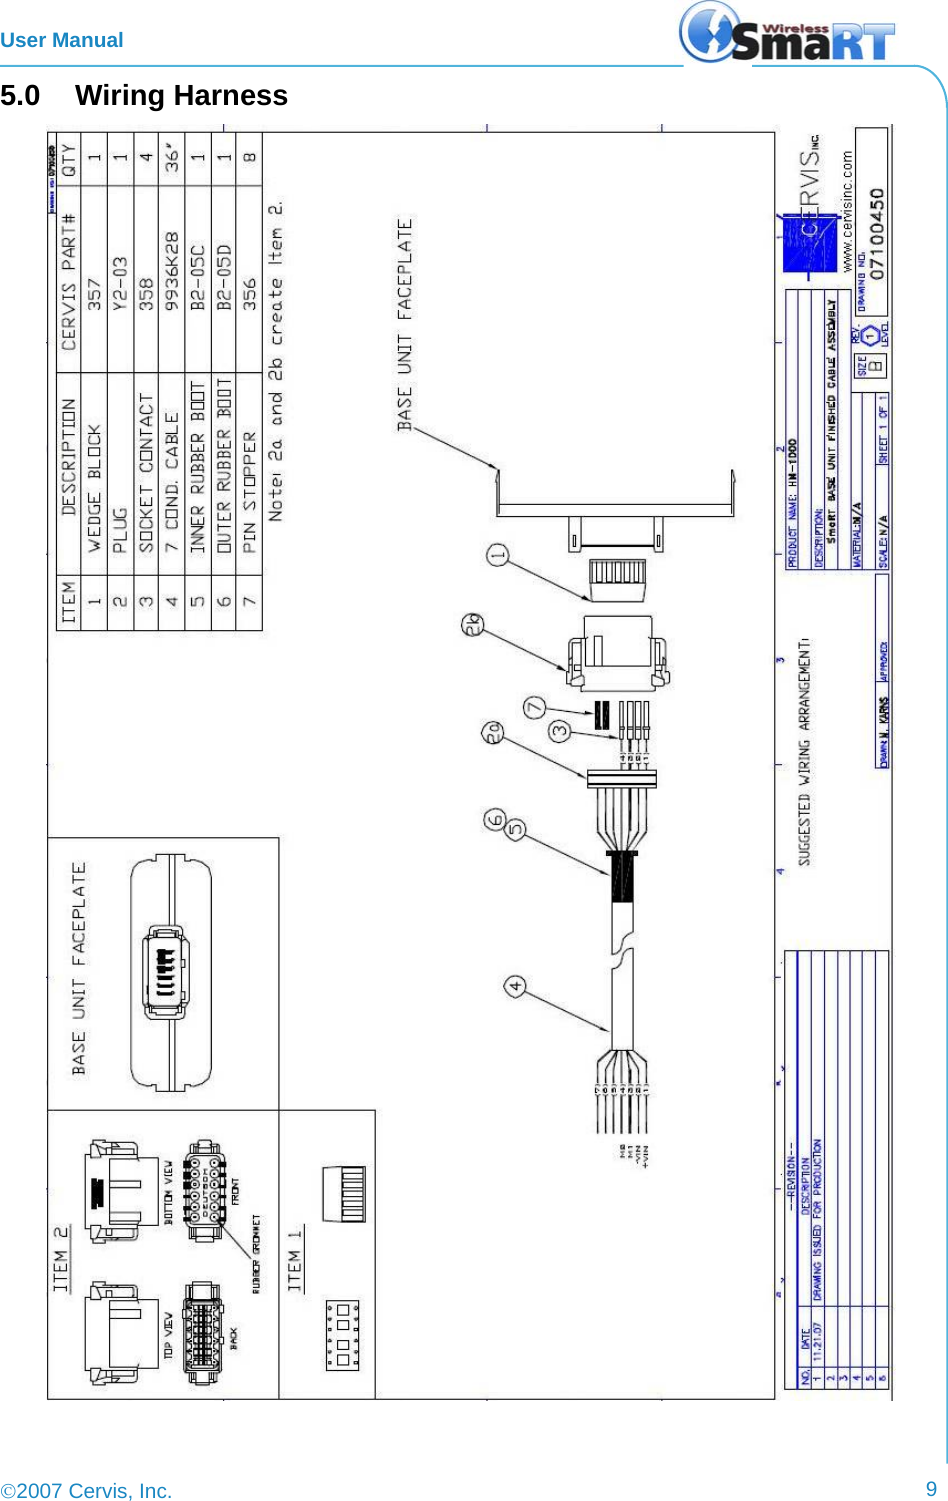 User Manual ©2007 Cervis, Inc.      95.0 Wiring Harness  